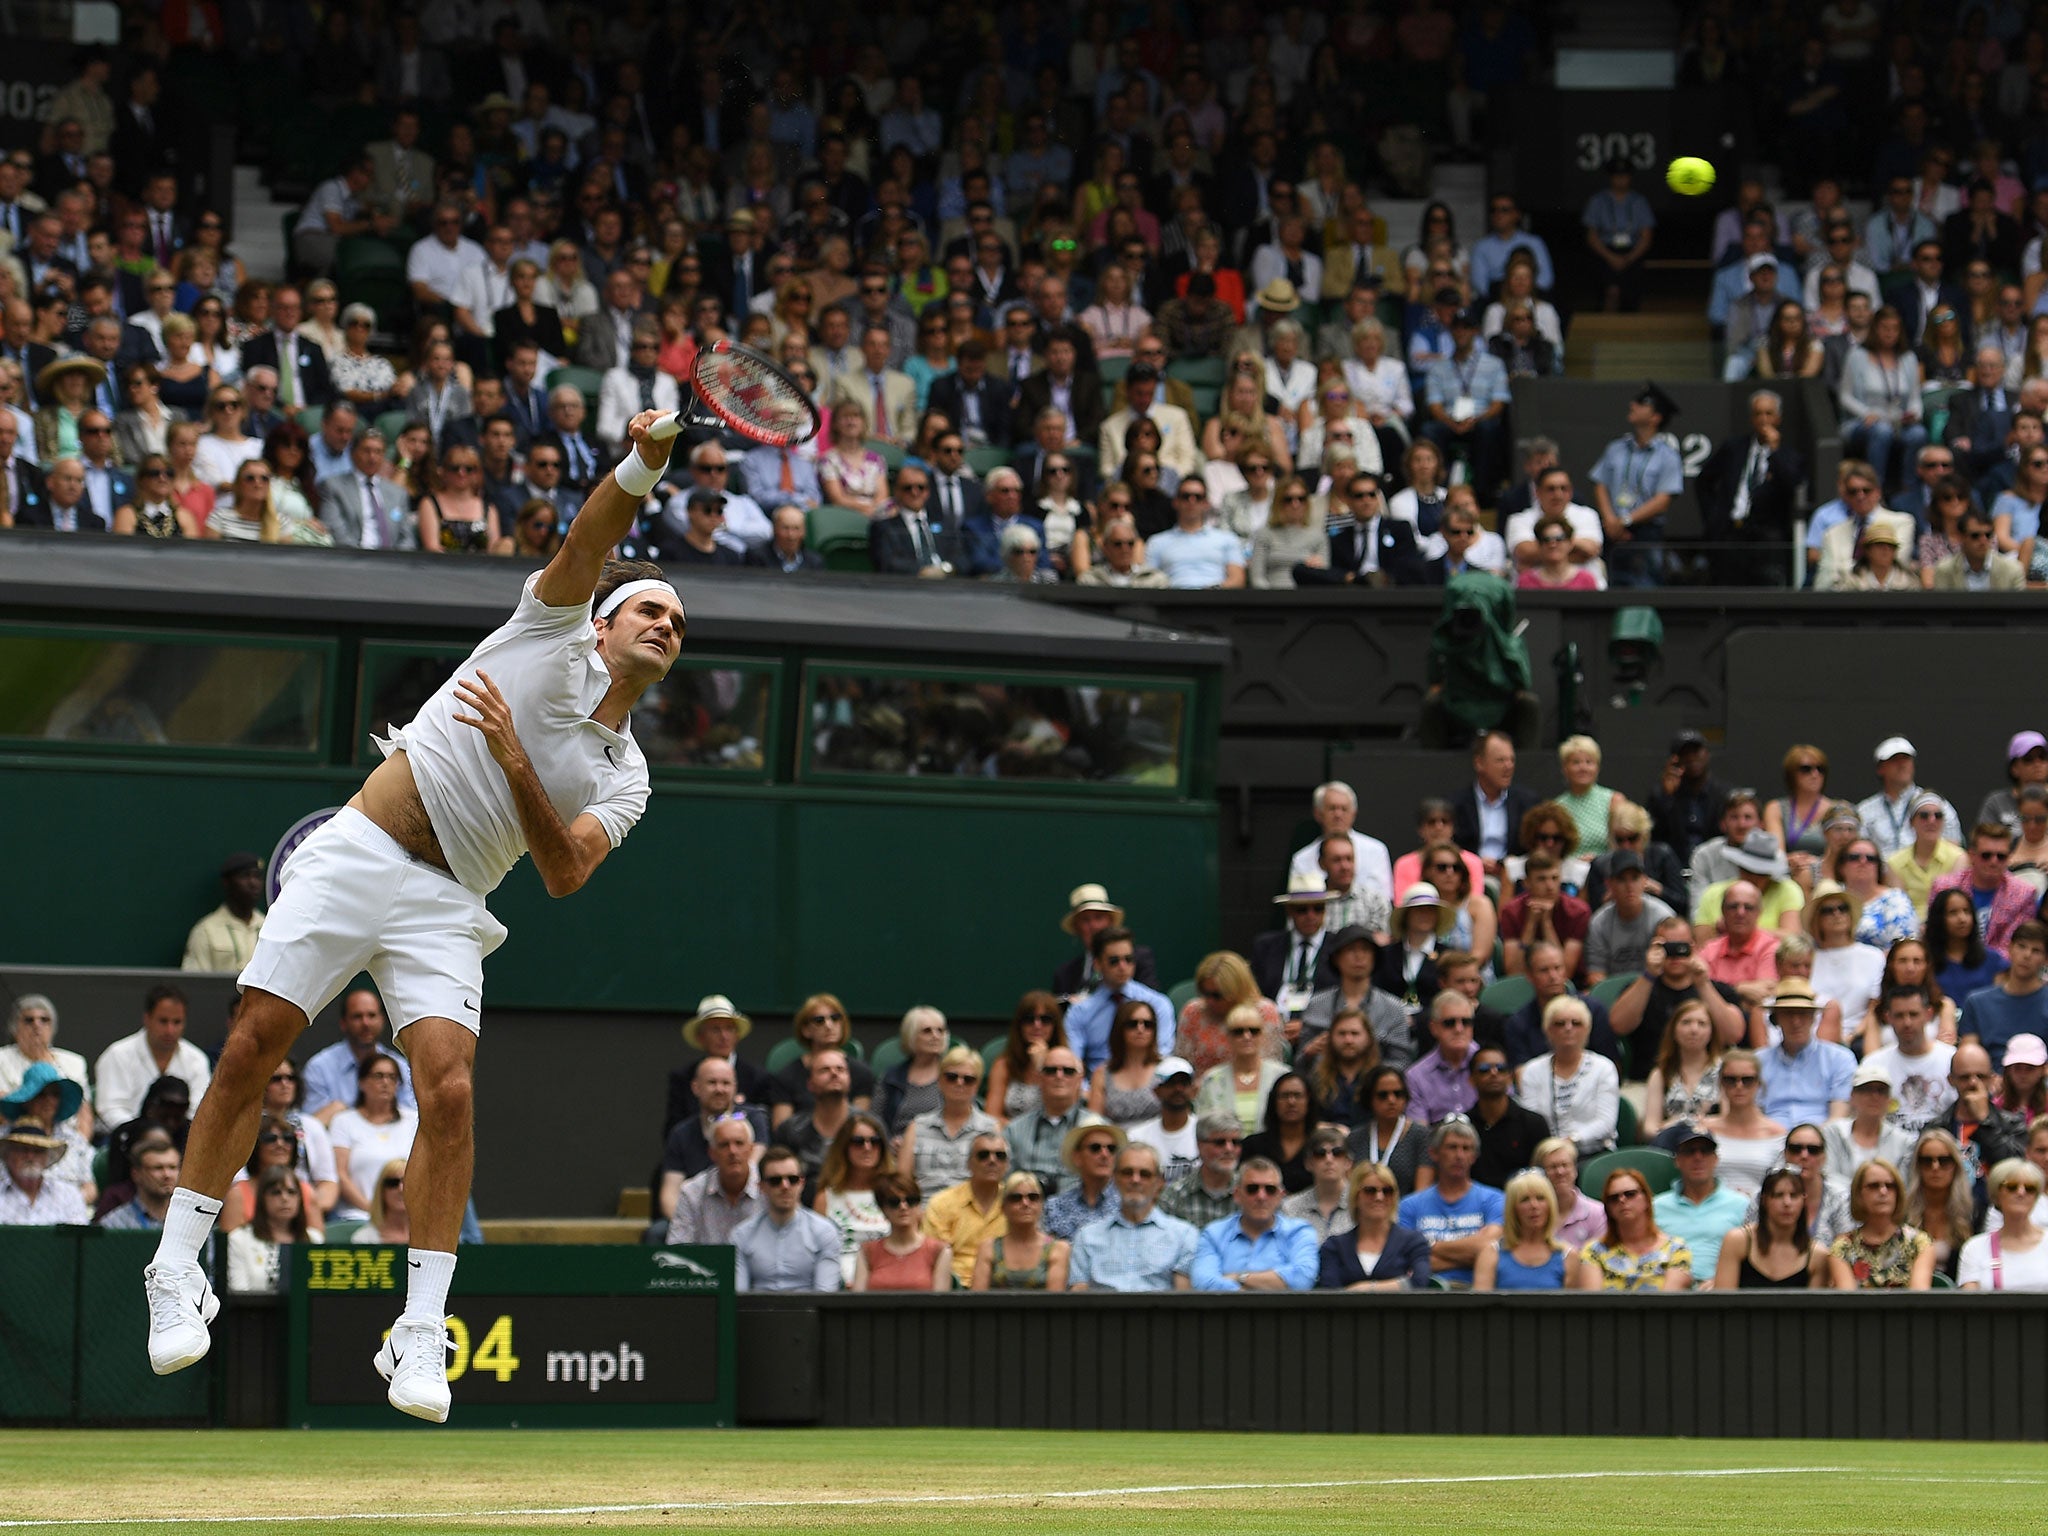 Roger Federer serves on his way to victory this week